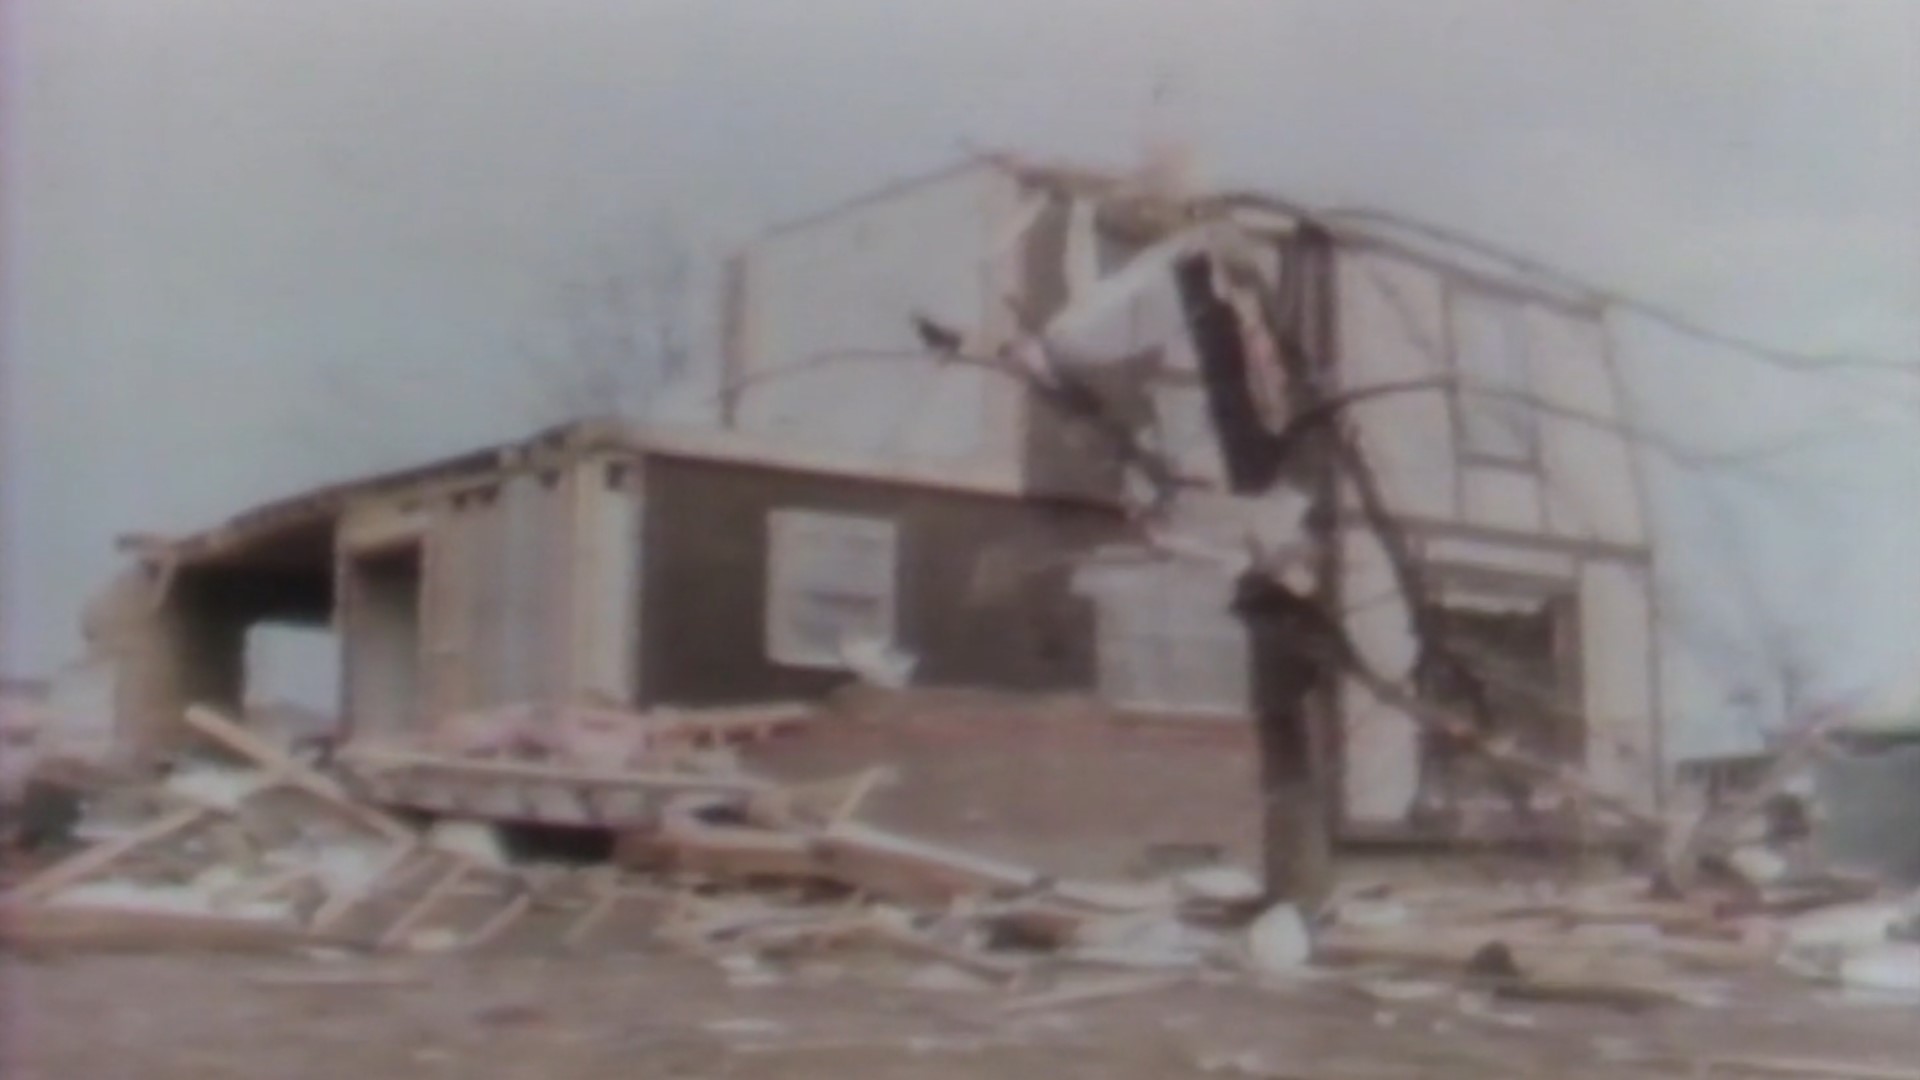 WHAS11's Joe Federle and Doug Proffitt take you back in time to when one of the deadliest tornados hit Kentucky.